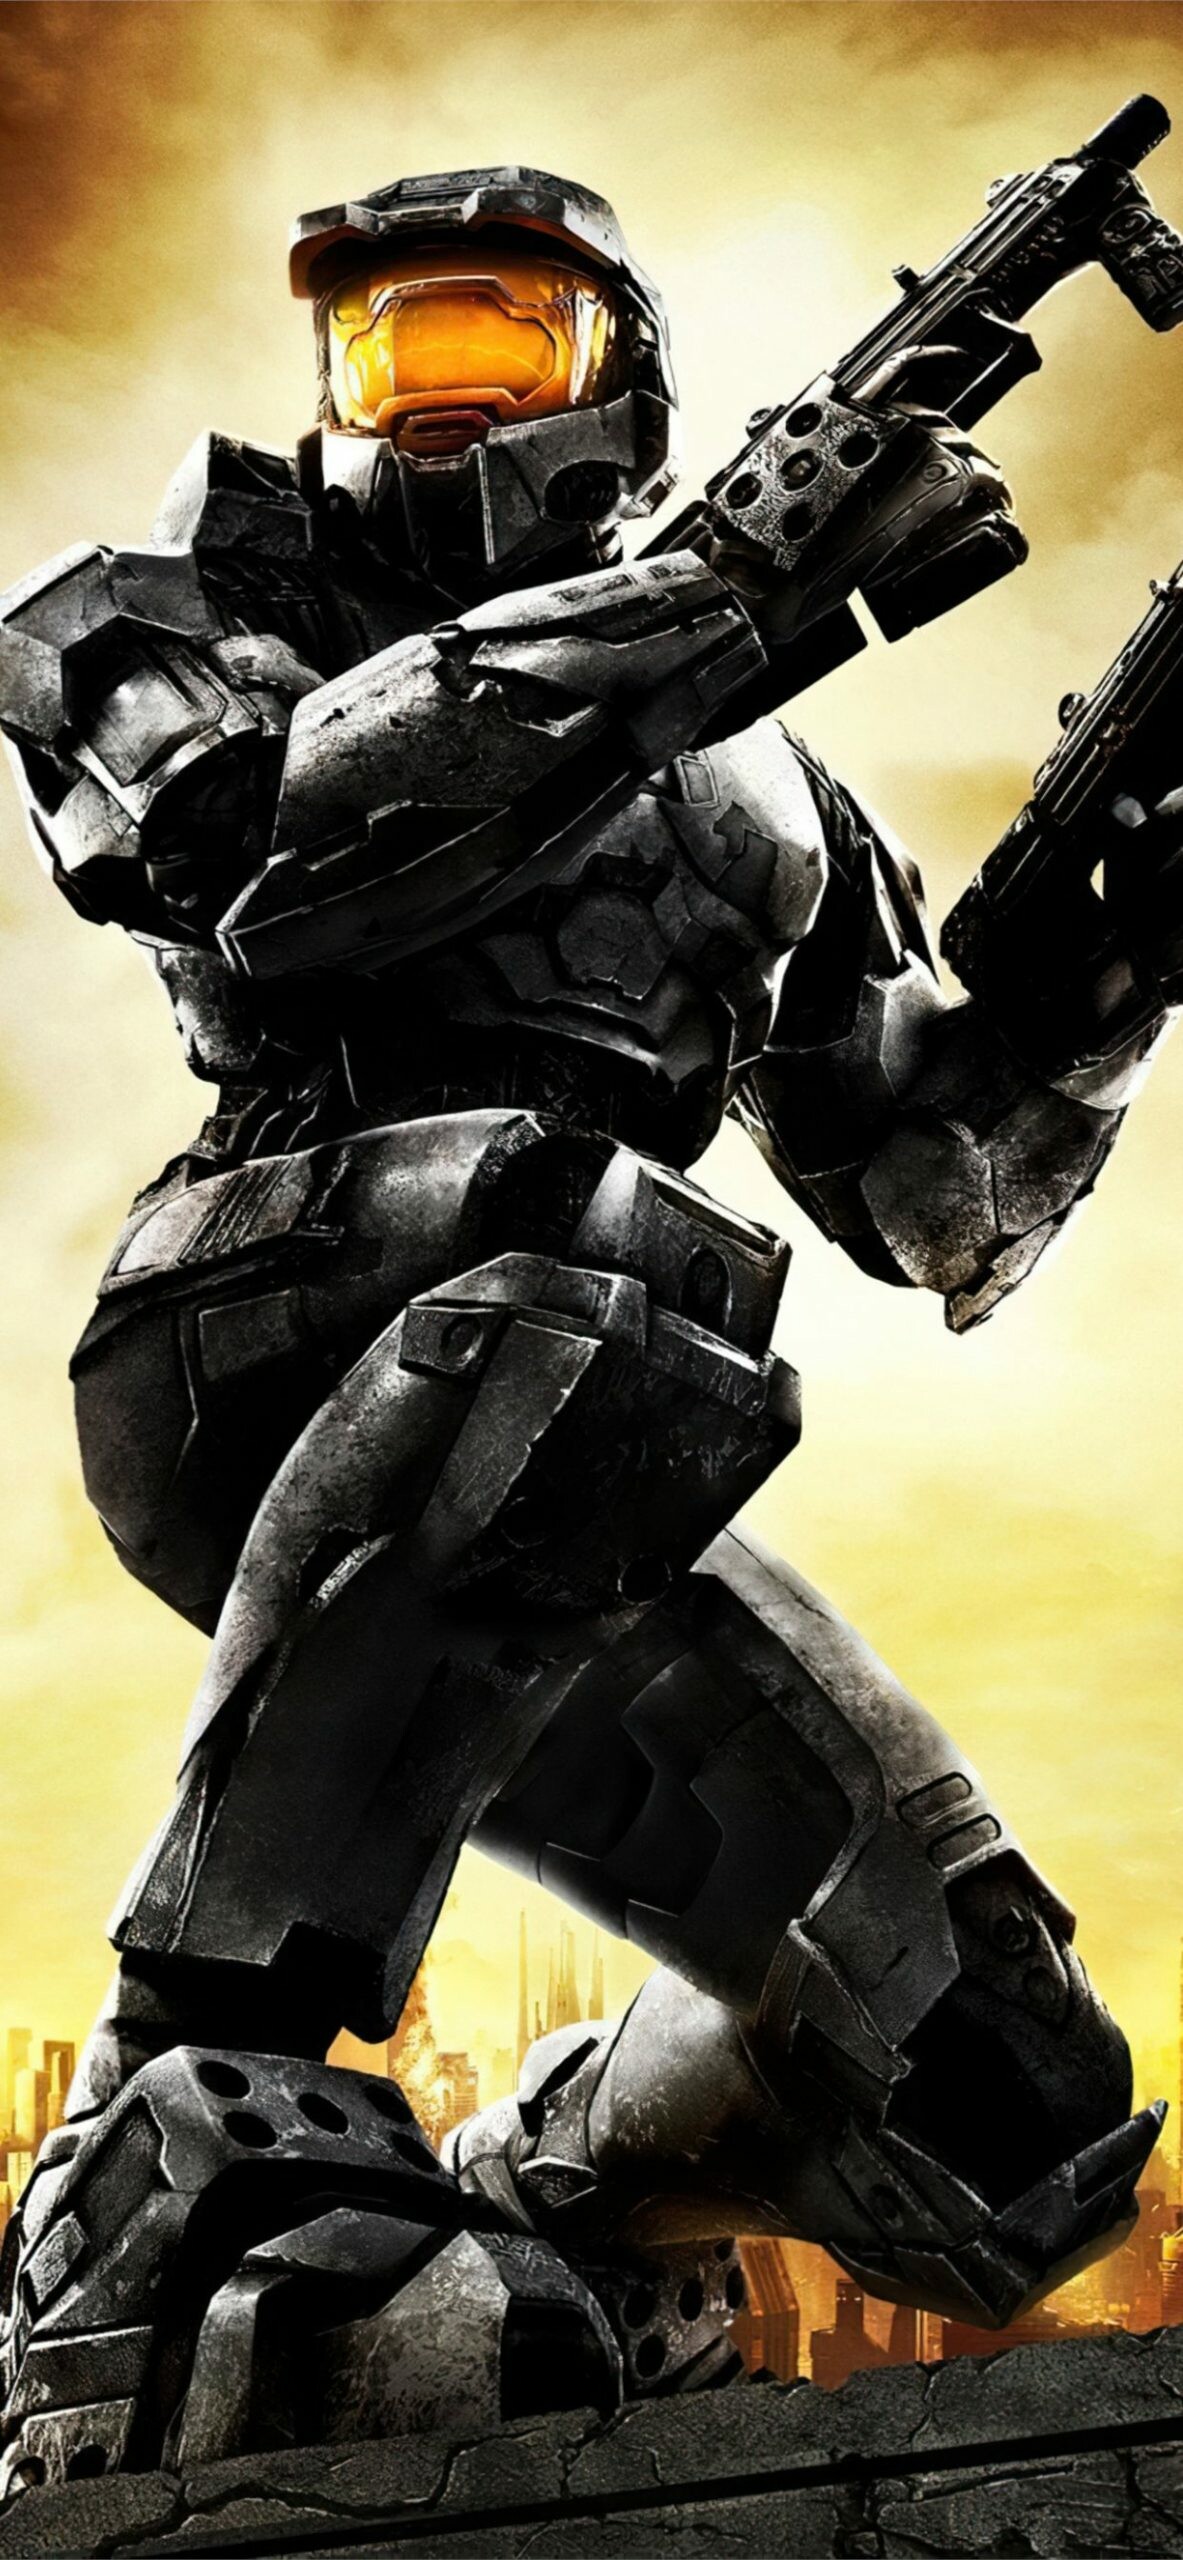 Halo: The iconic Xbox video game franchise, Originally developed by Bungie. 1190x2560 HD Background.